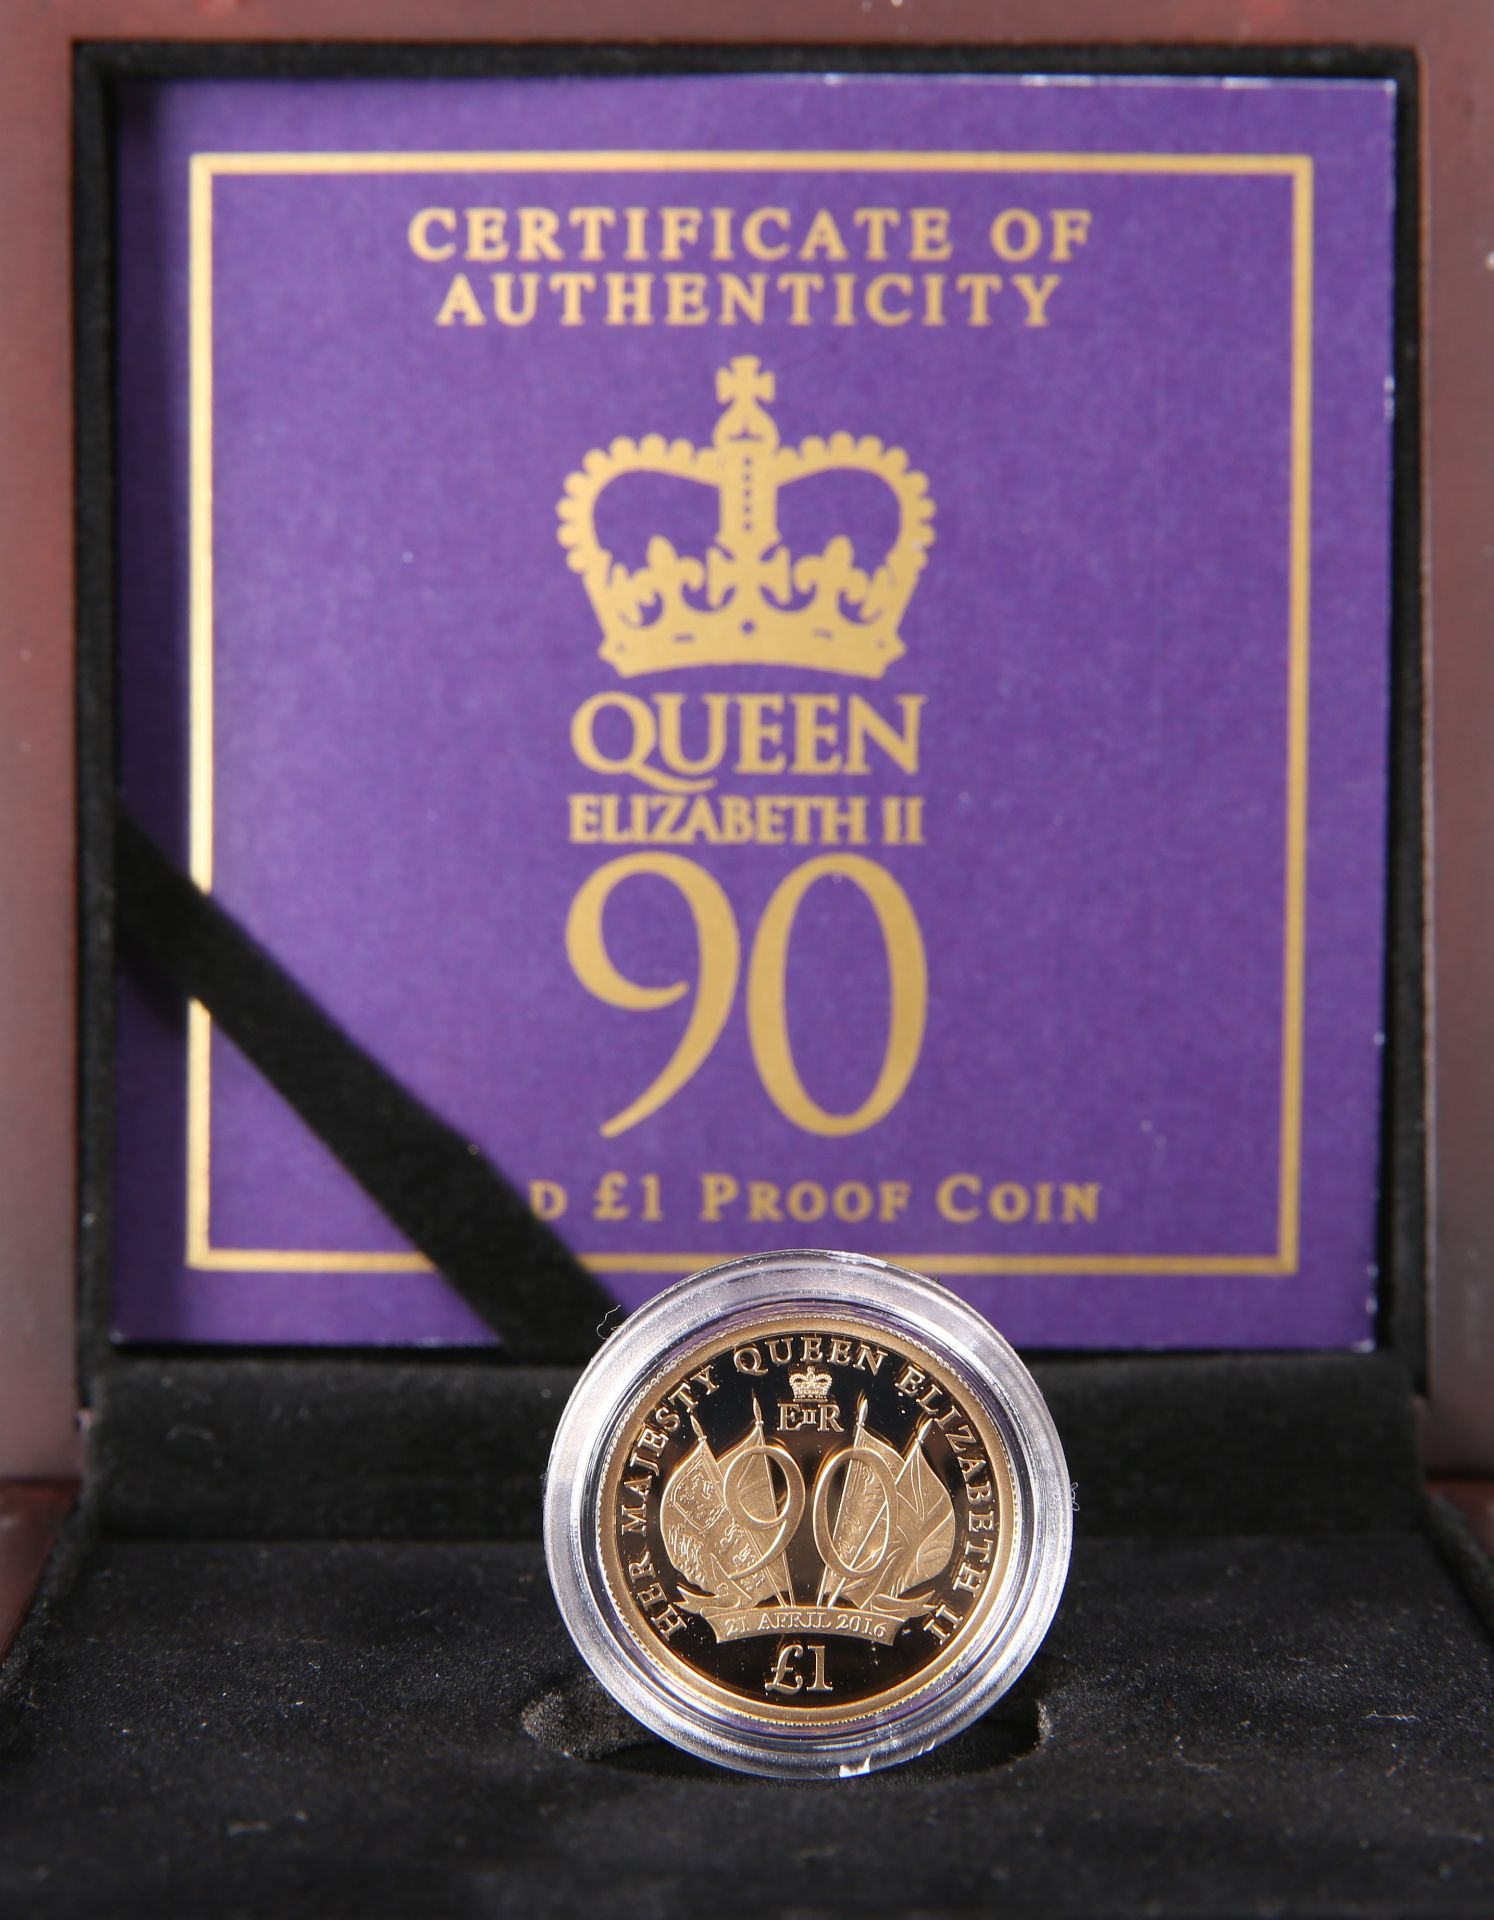 A 2016 GOLD PROOF ONE POUND COIN, "HER MAJESTY THE QUEEN'S 90TH BIRTHDAY", no. 994, boxed with